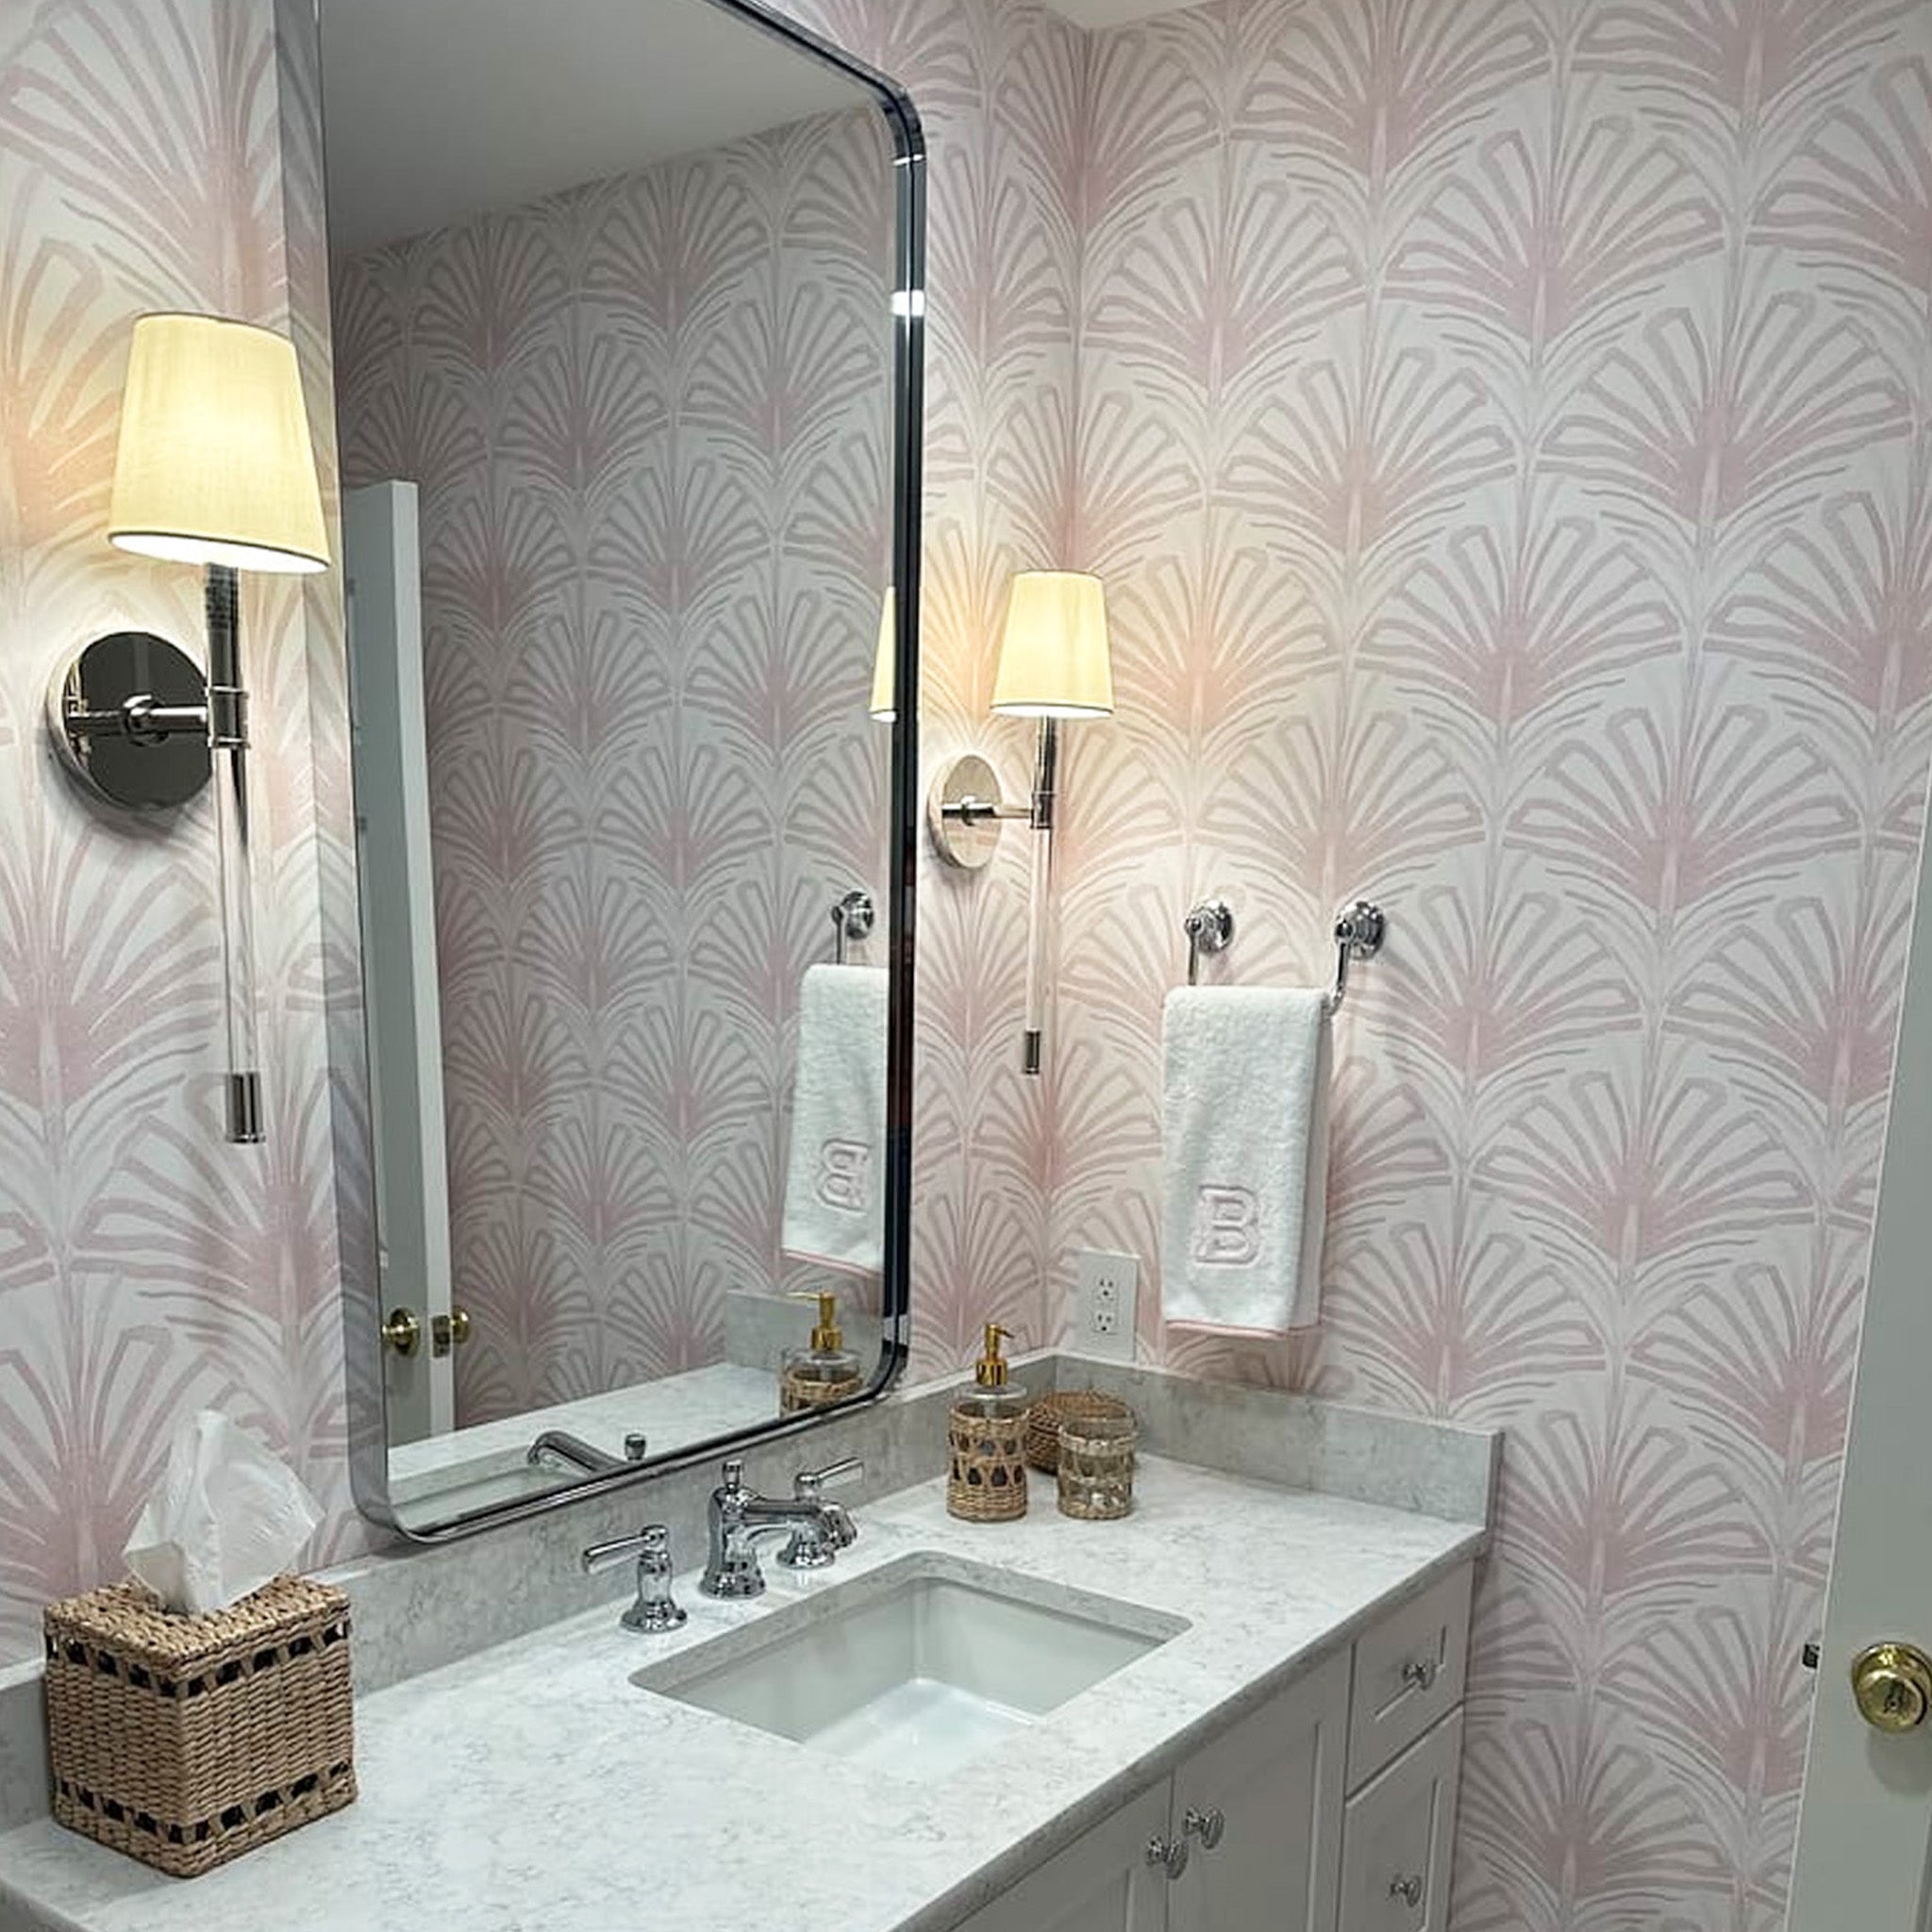 white granite Bathroom sink close-up styled with rose pink palm printed wallpaper